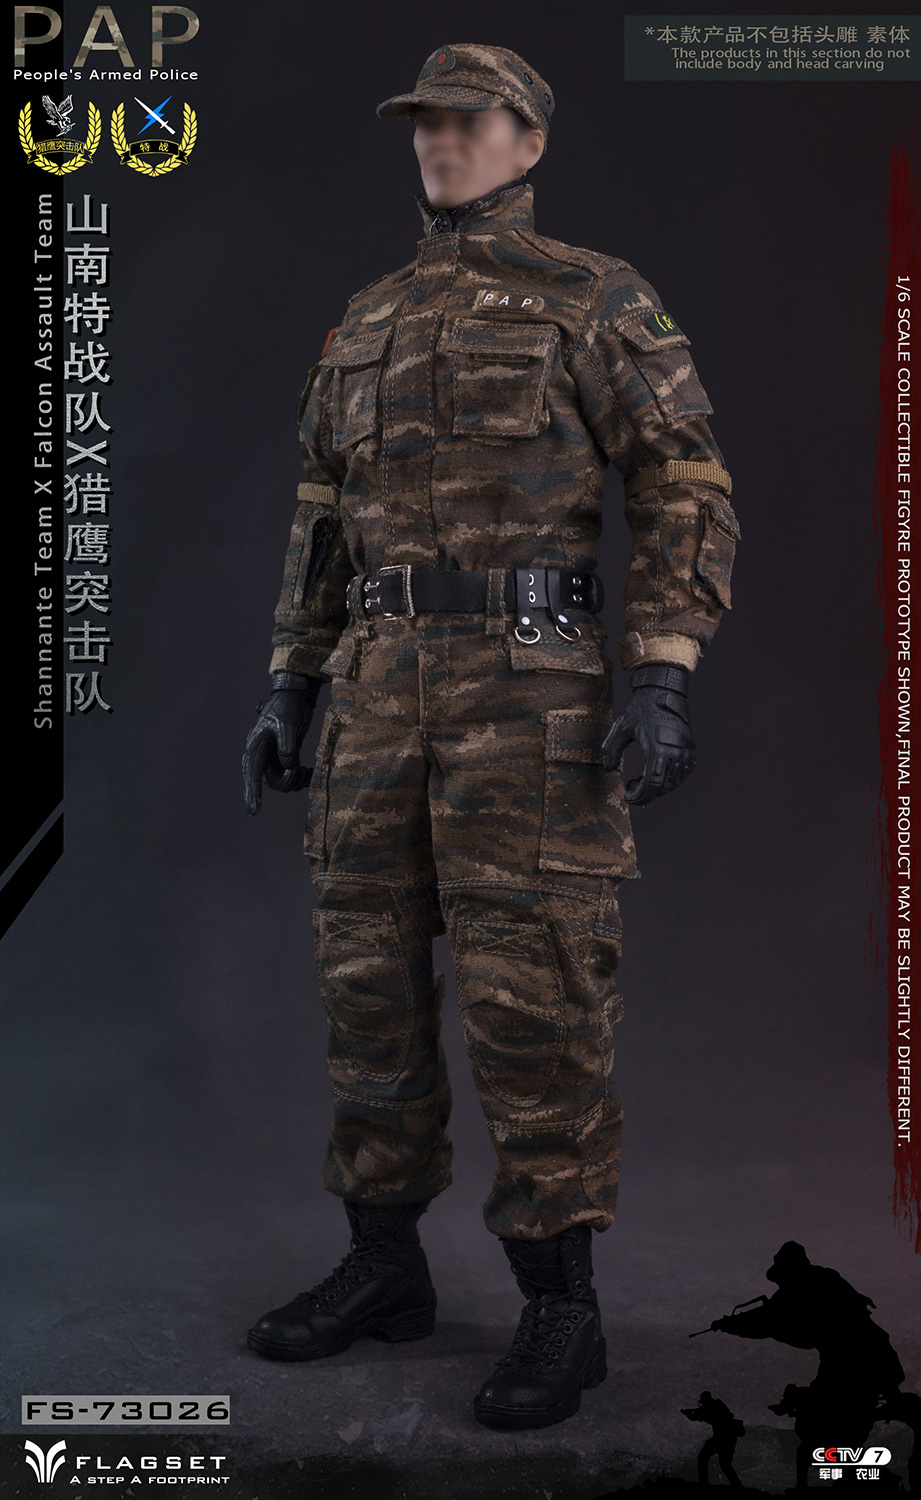 accessories - NEW PRODUCT: Flagset: 1/6 Chinese armed police special team - Shannan detachment / Falcon commando Wudong camouflage suit (FS73026#) 01105311